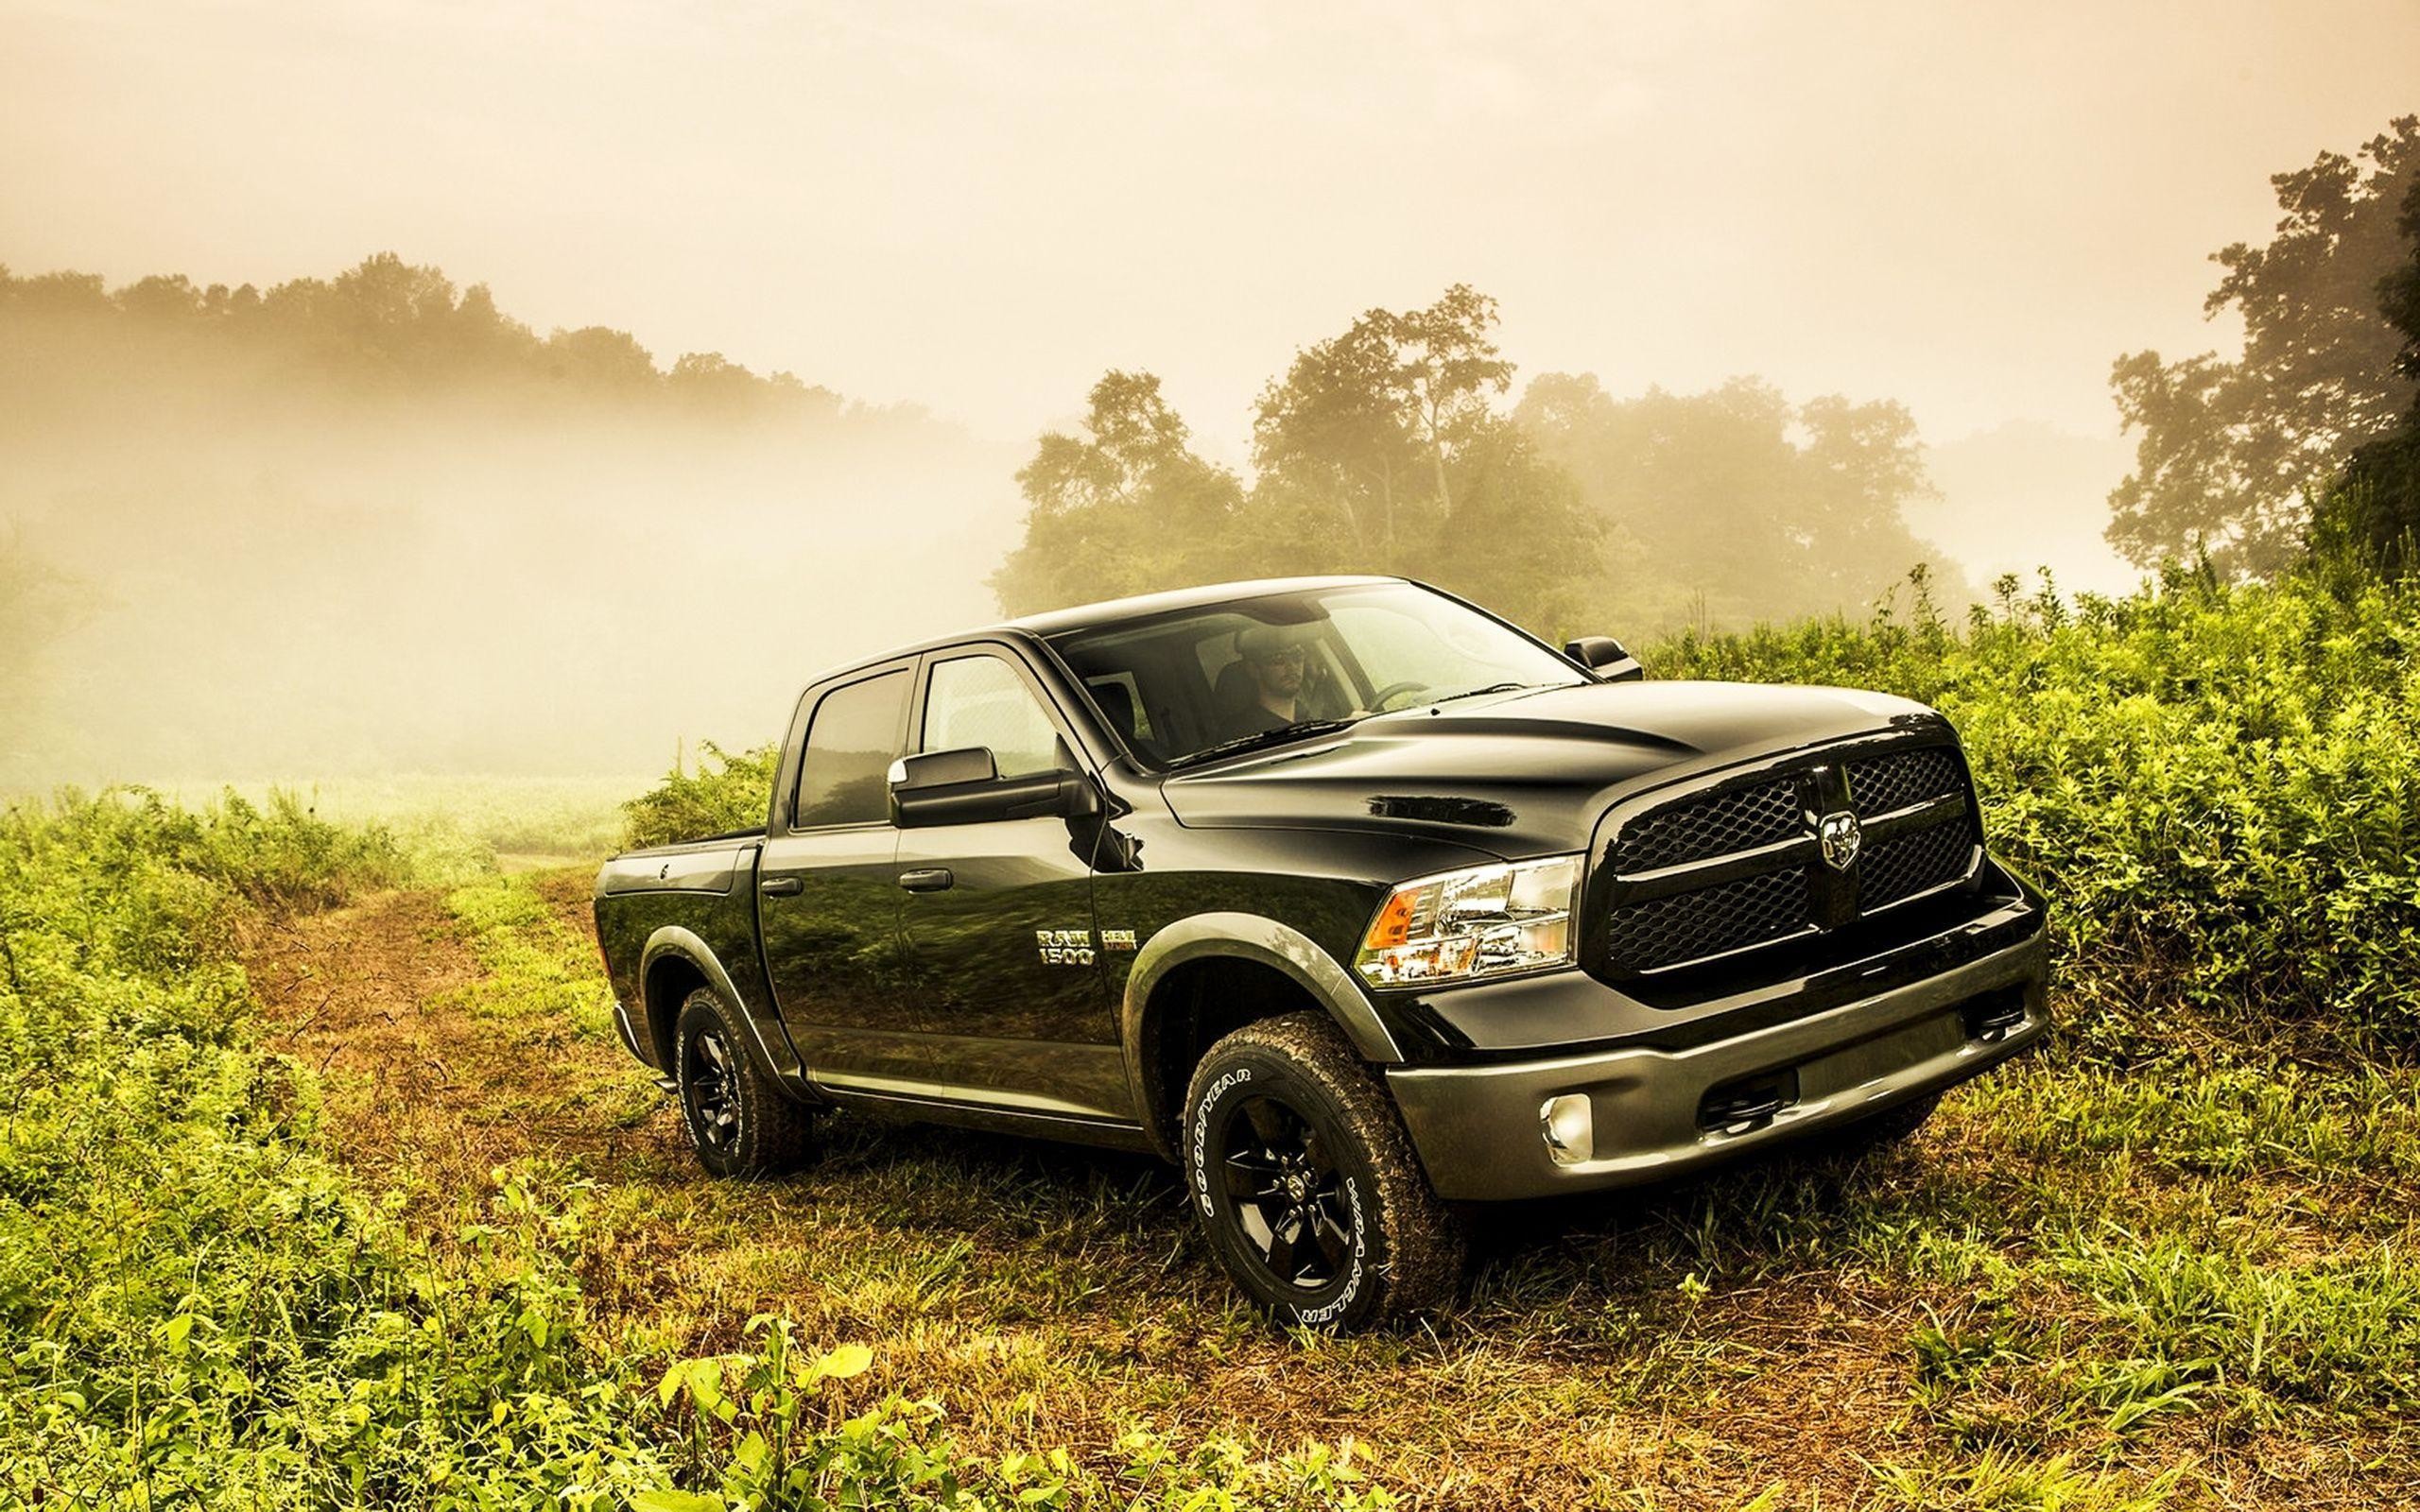 2560x1600 15 Dodge Ram 1500 HD Wallpapers | Backgrounds - Wallpaper Abyss